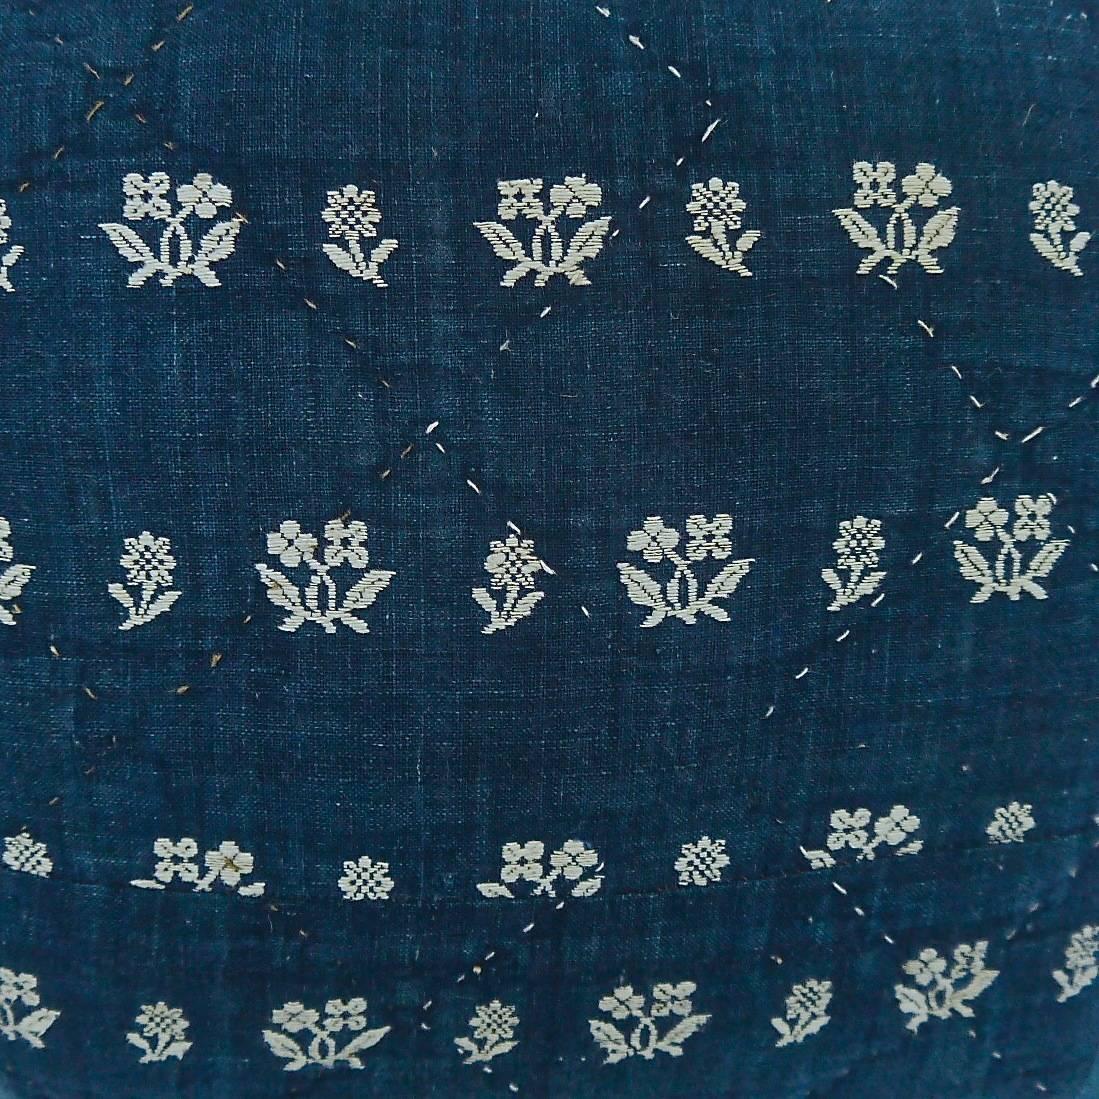 French Provincial 18th Century French Antique Indigo Woven Floral Linen Pillows